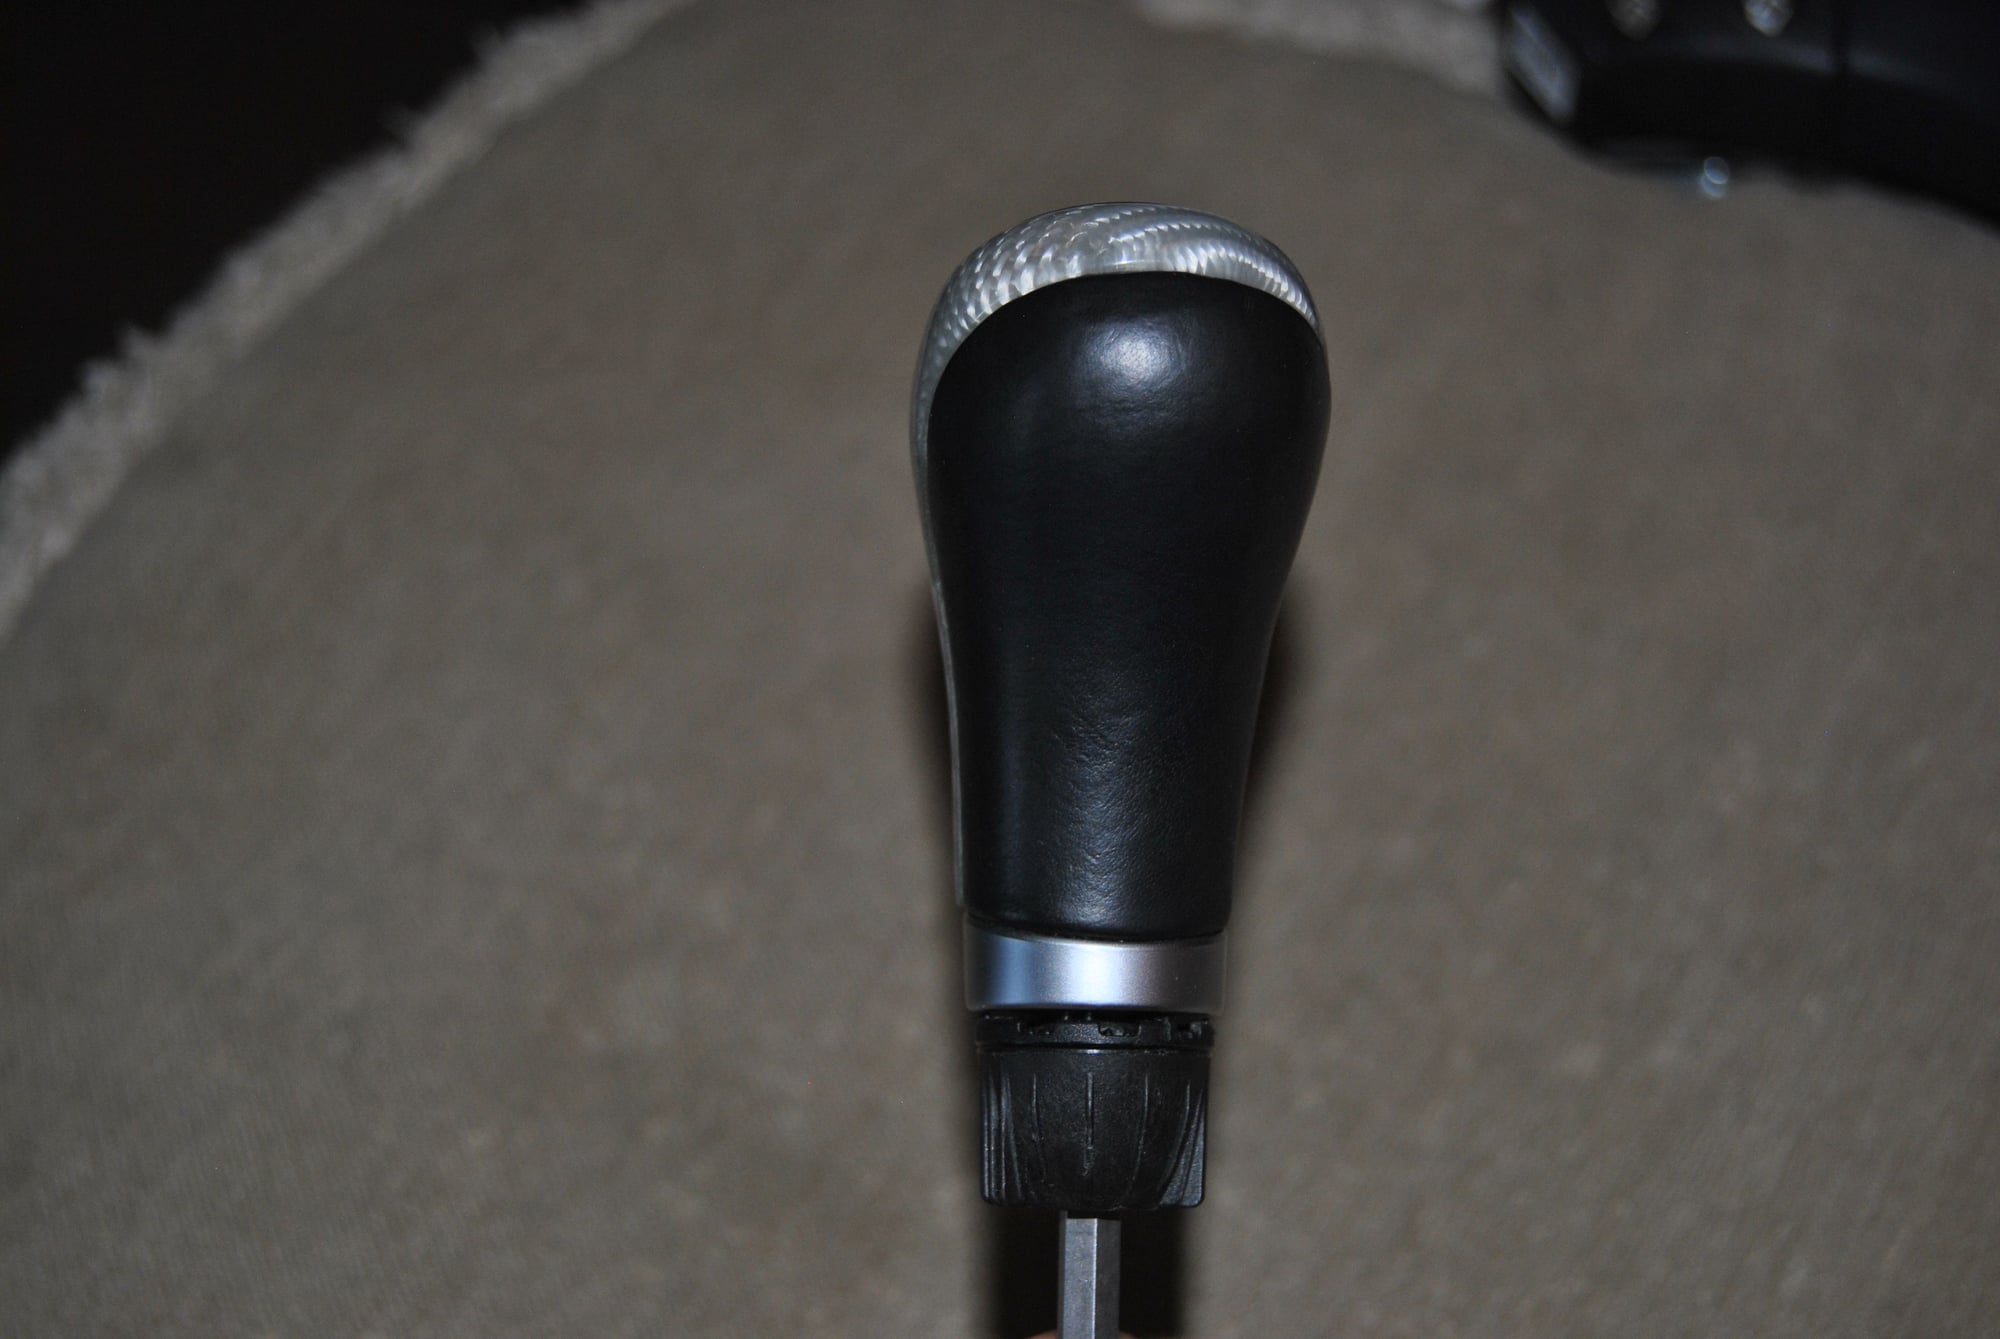 Interior/Upholstery - '01-'04 MB W203 Flat Bottom Carbon Fiber & Leather Steering Wheel/Gearshift Knob - Used - 2001 to 2004 Mercedes-Benz All Models - Upland, CA 91784, United States